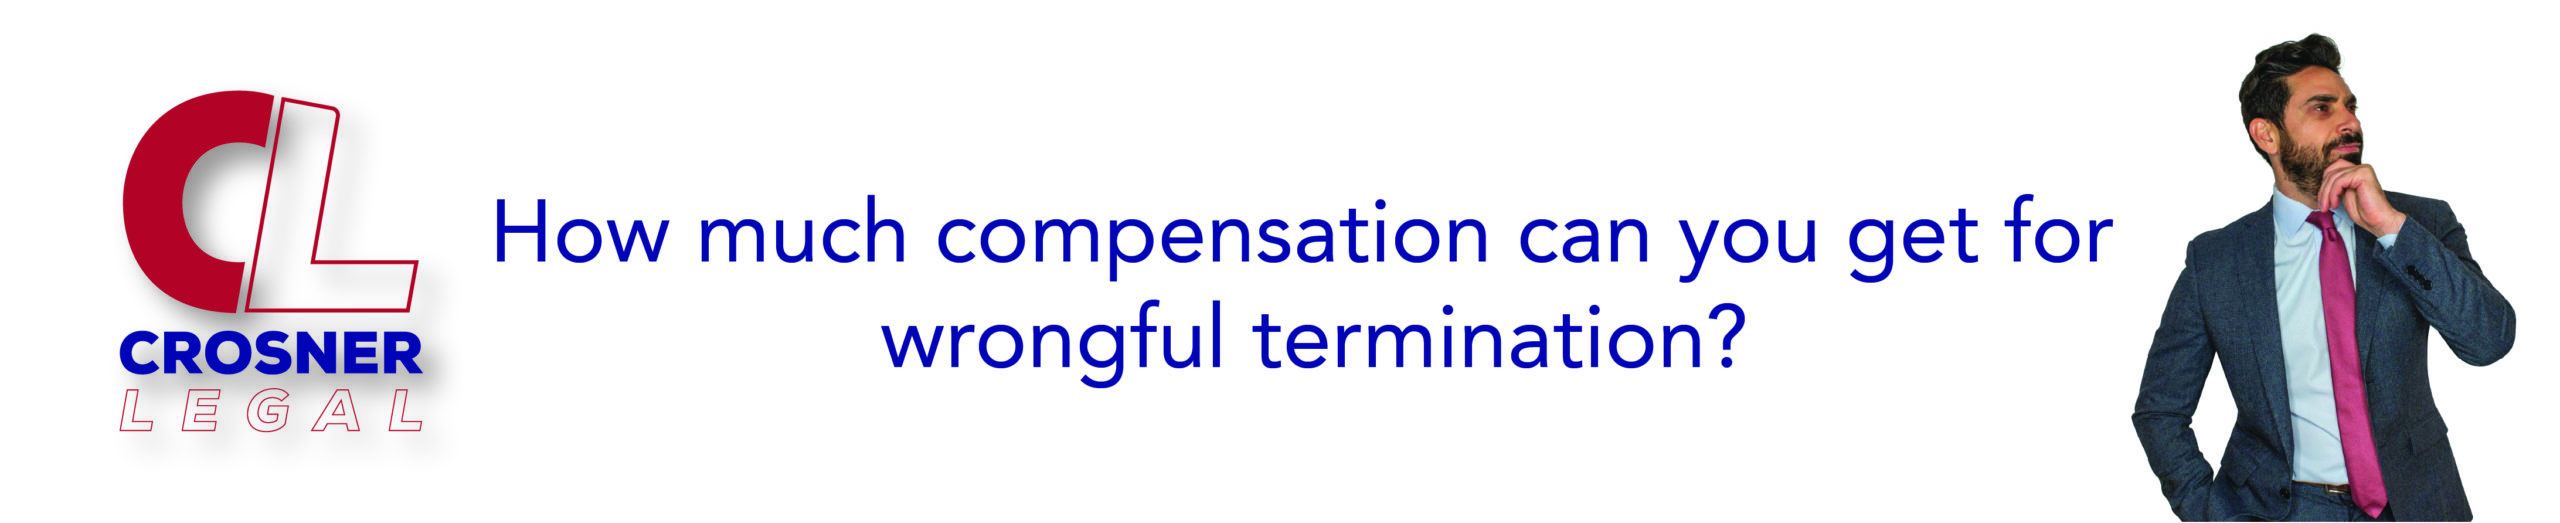 How much compensation can you get for wrongful termination?